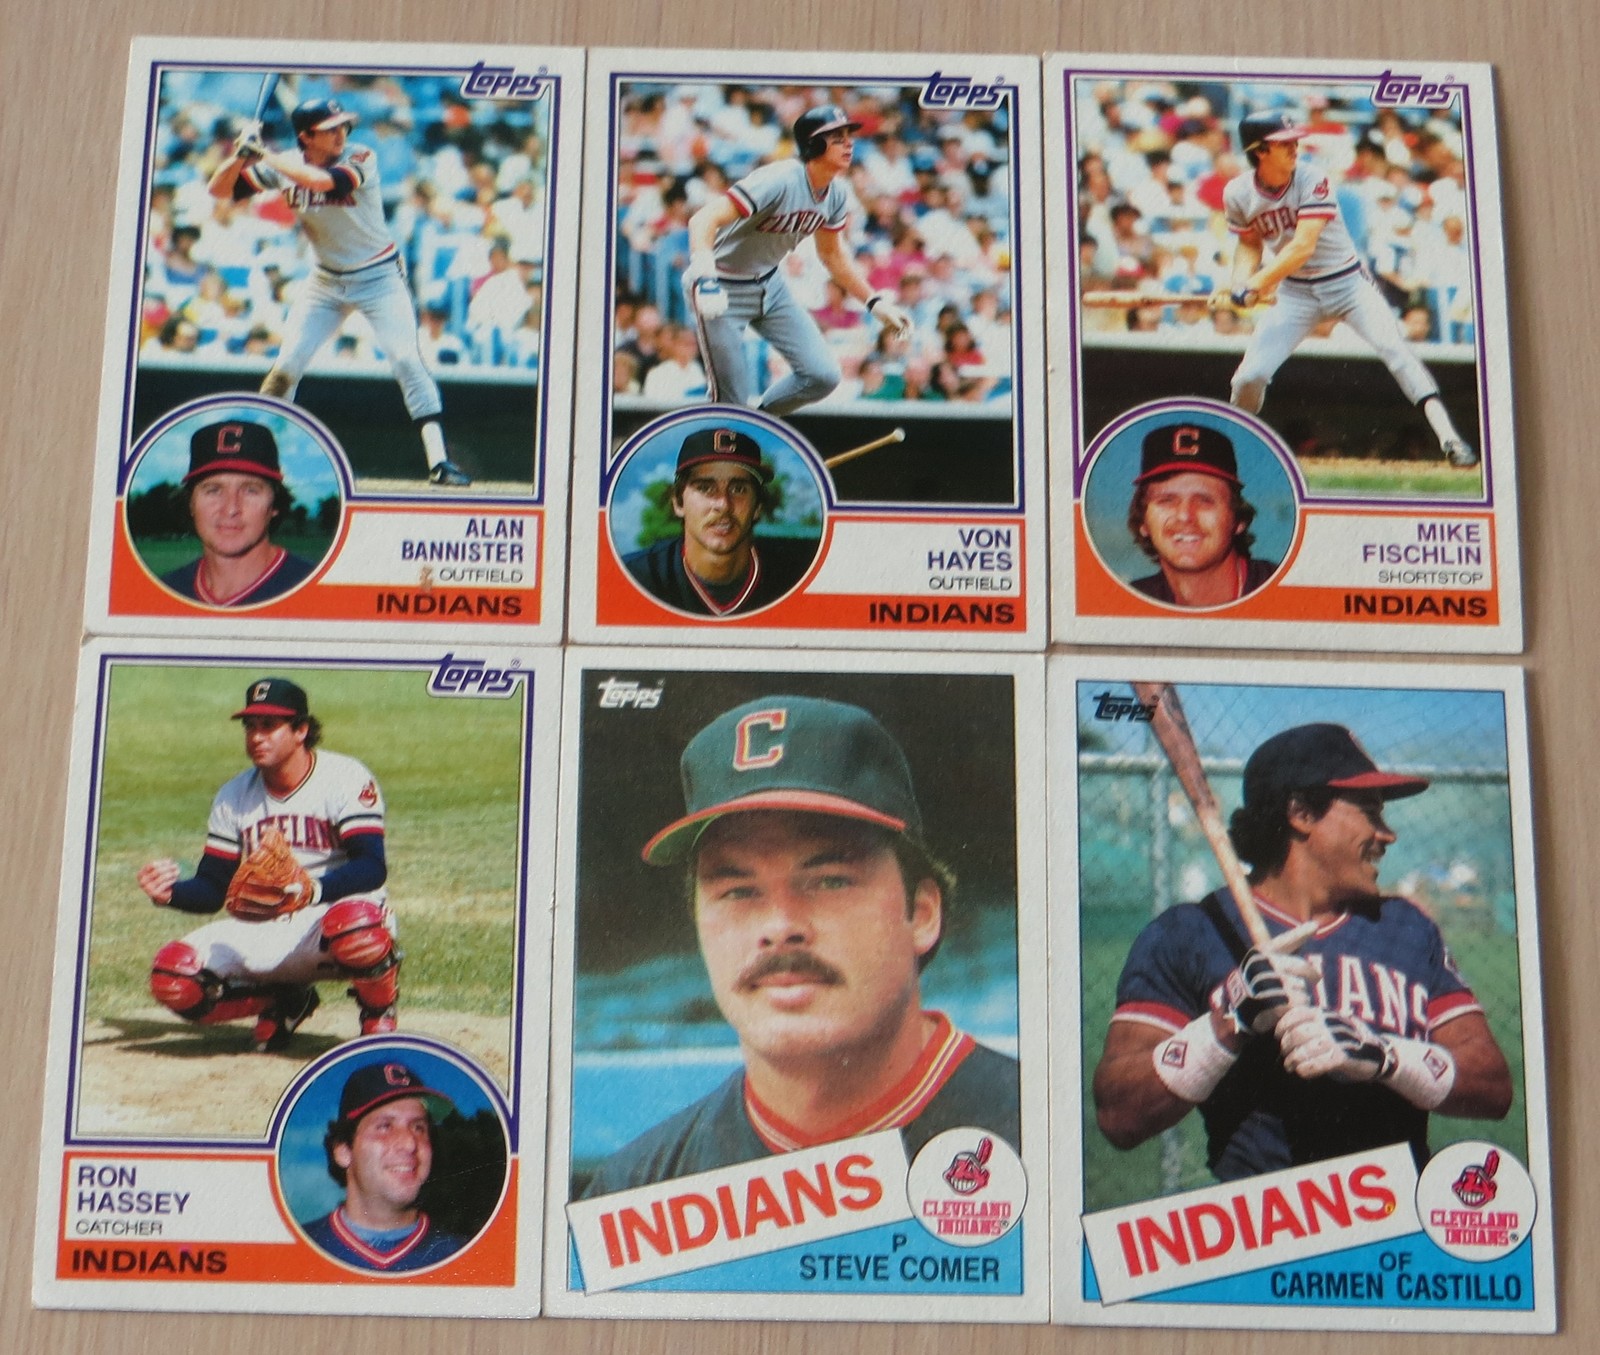 Primary image for Topps 1983 Alan Bannister and 5 plus Indian Baseball cards set # 57